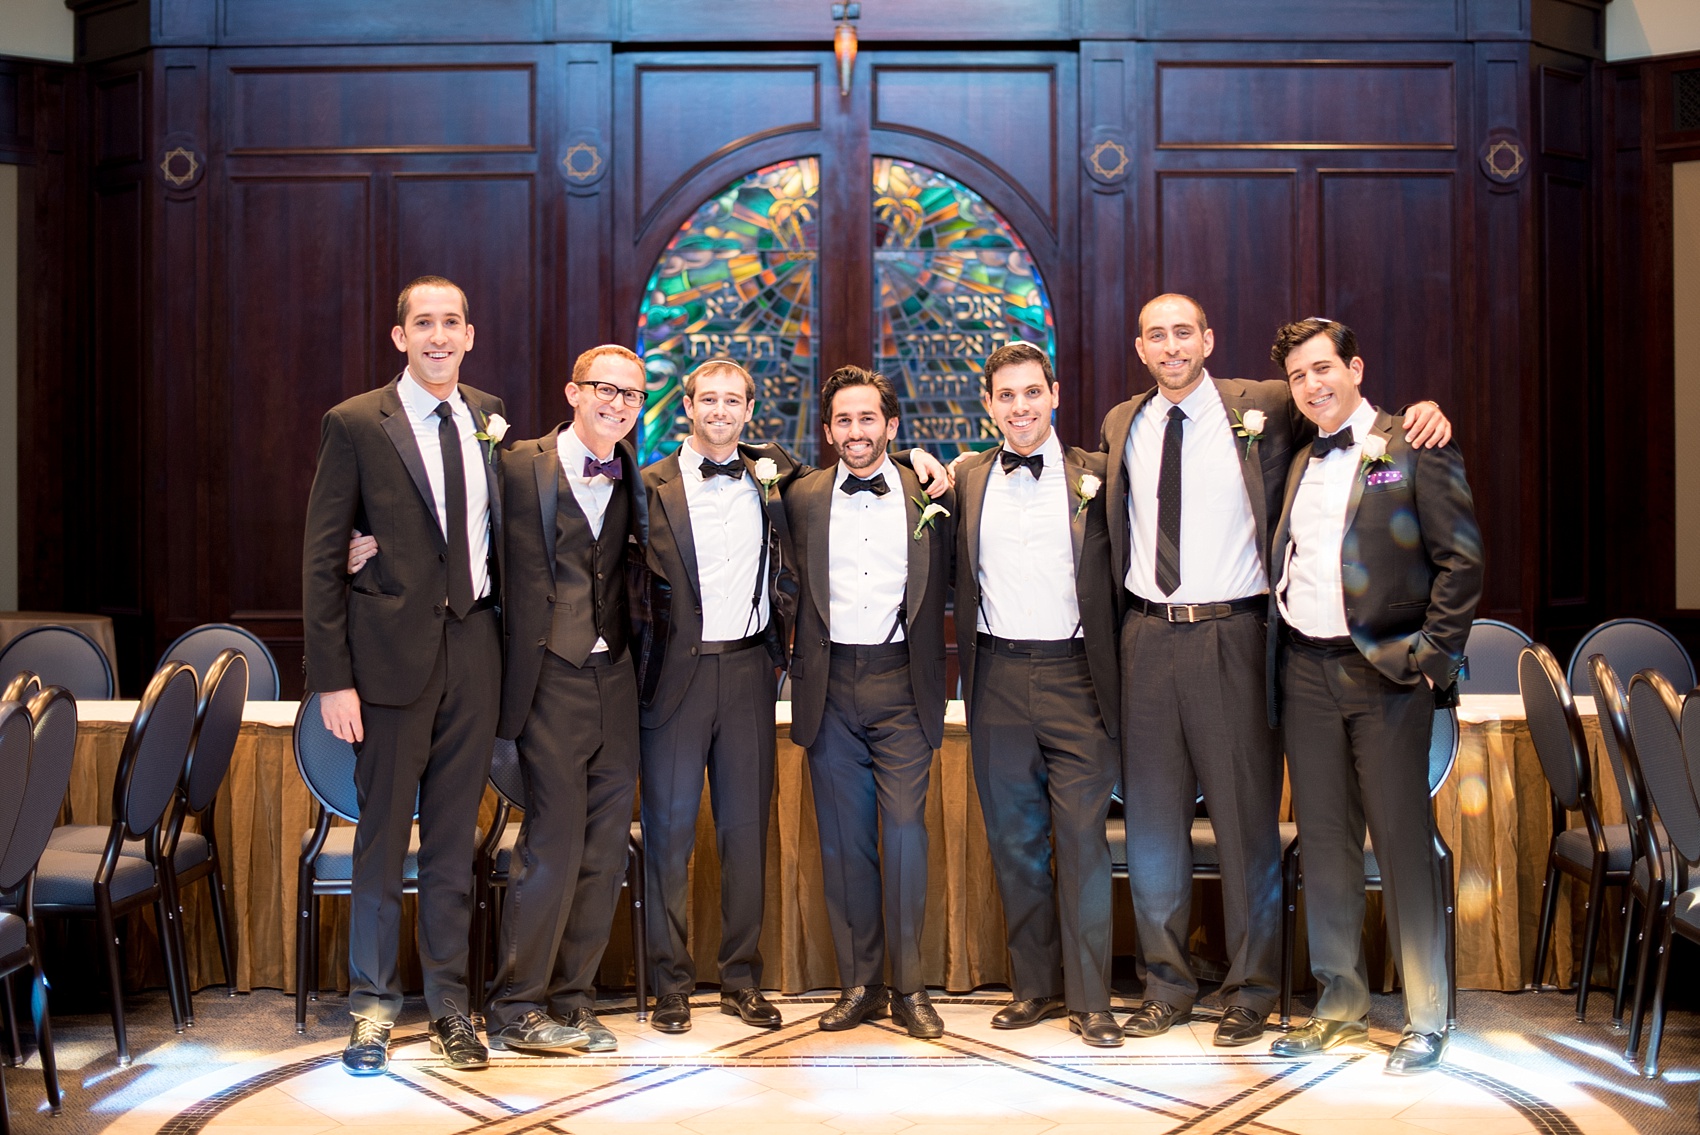 Mikkel Paige Photography photo of the groom at his Jewish religion tish at Temple Emanu-El in Closter, NJ.